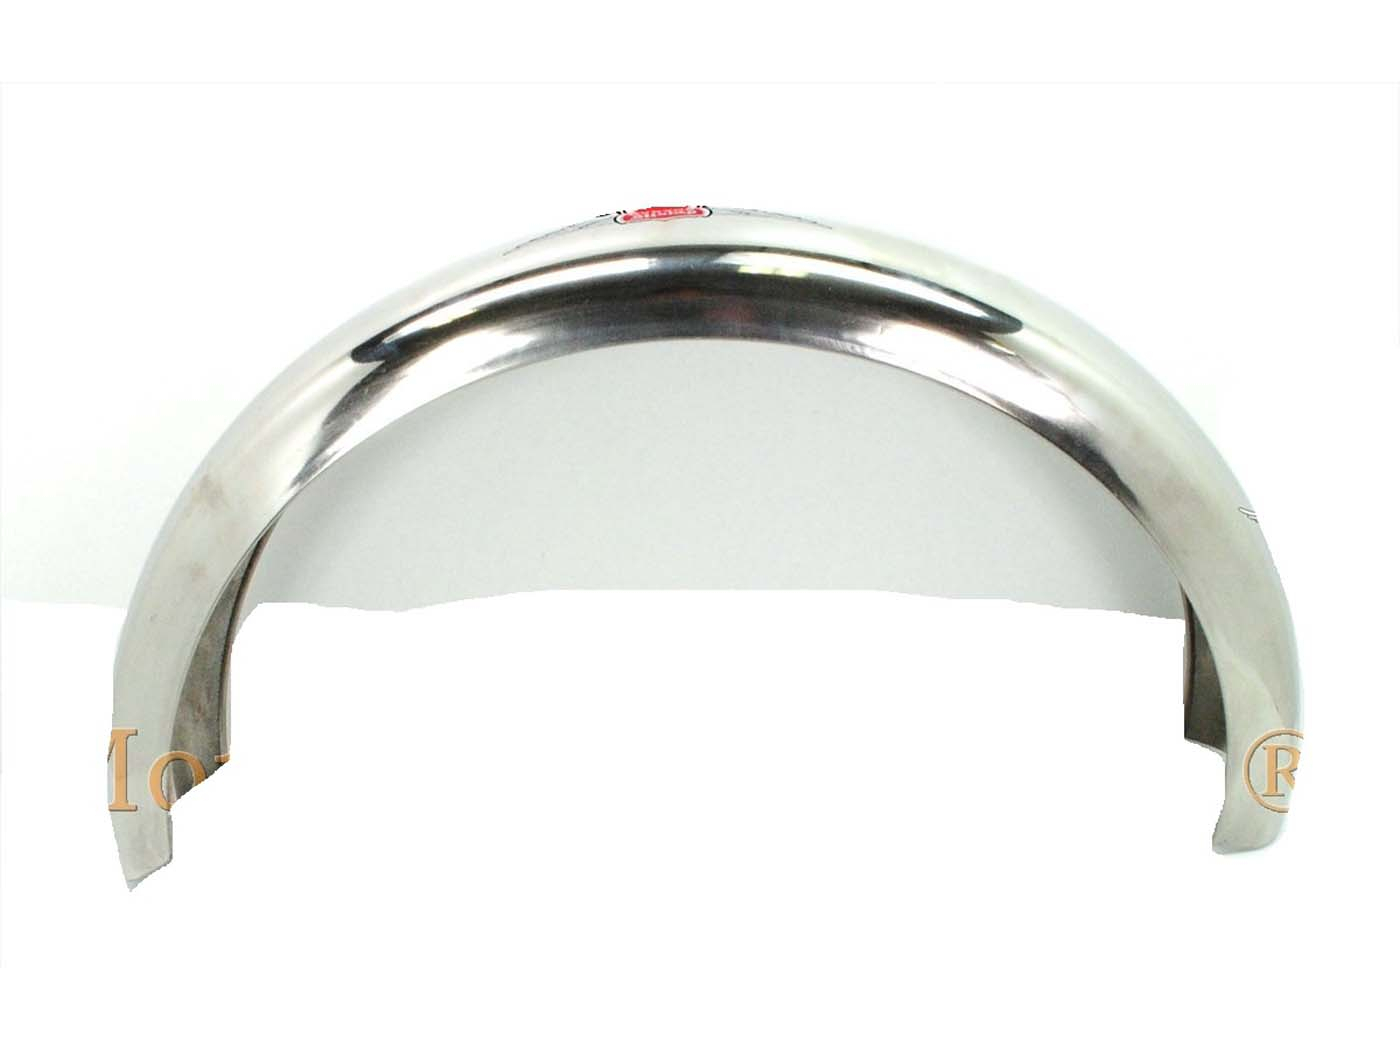 Mudguard Rear Stainless Steel Short Version For Puch Monza